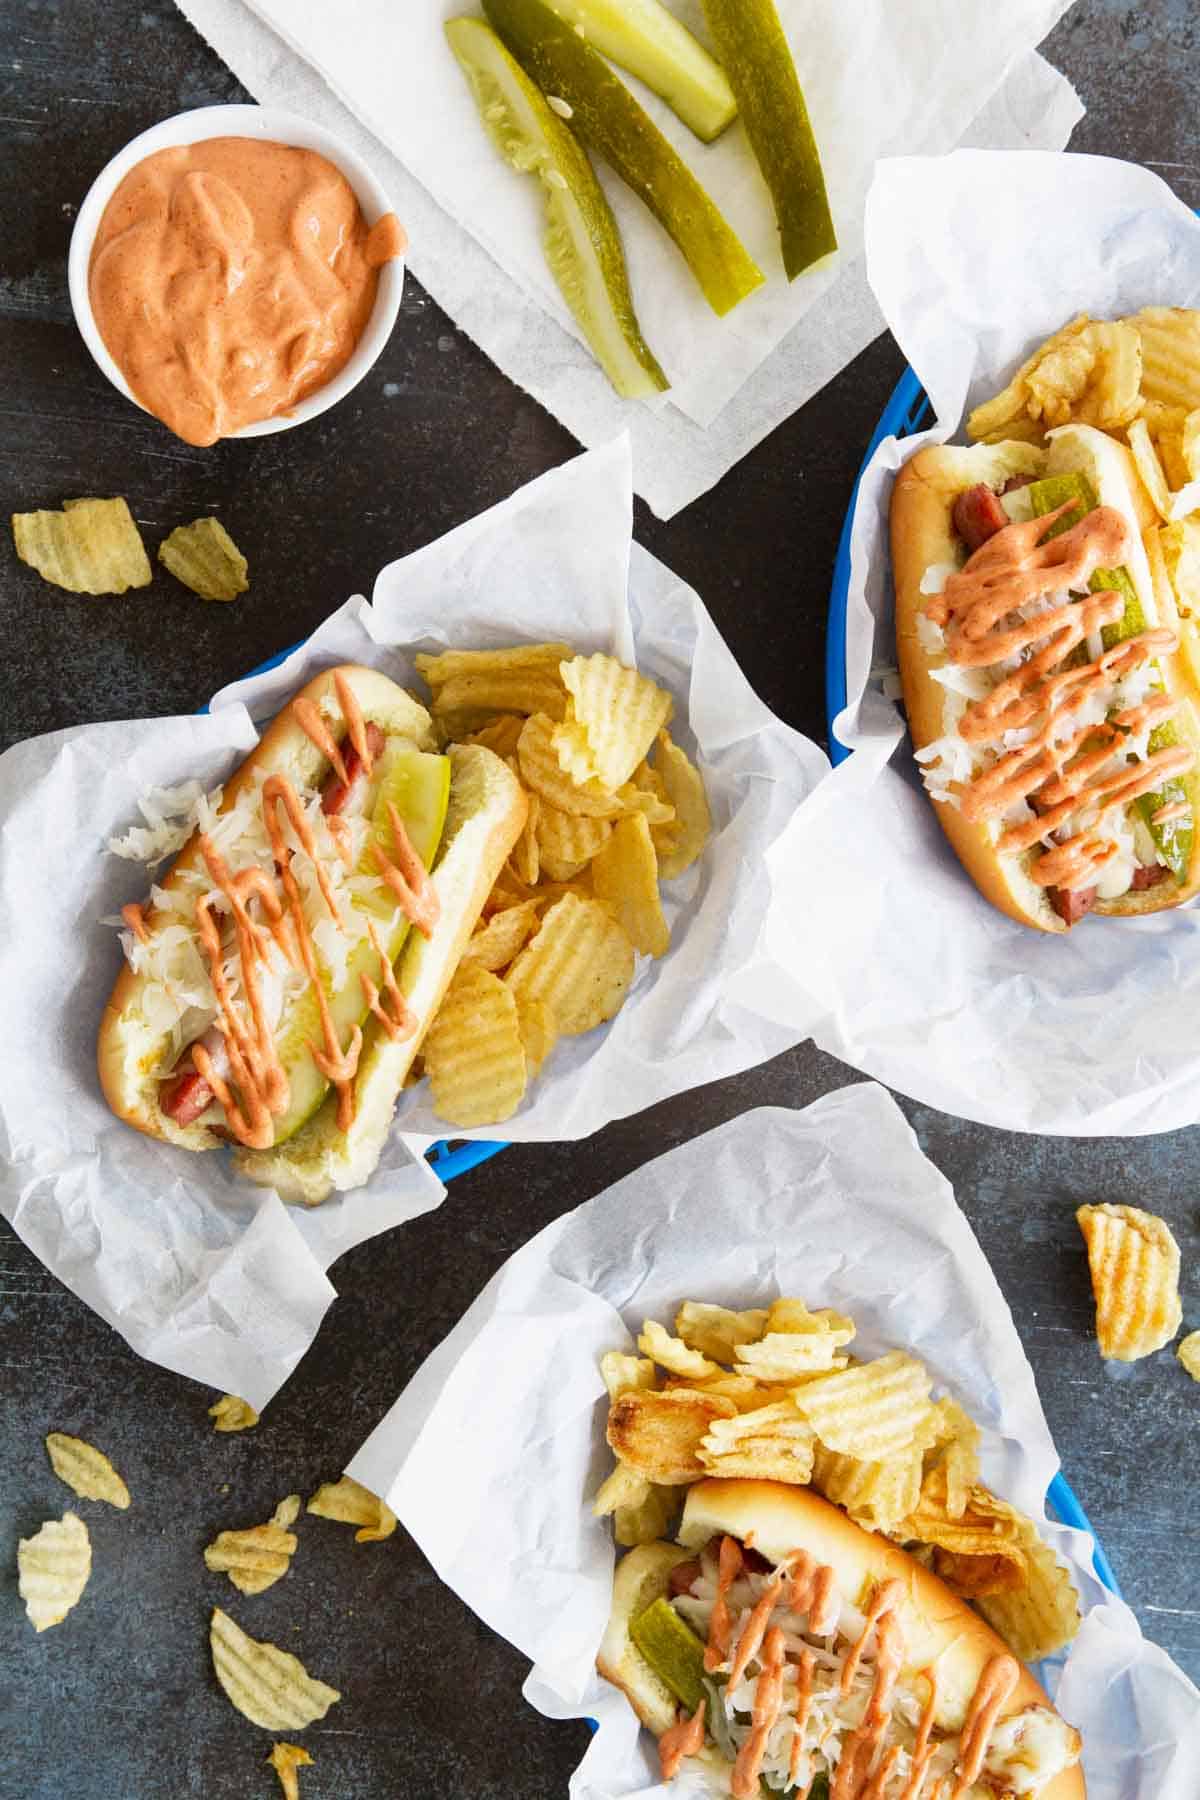 Reuben hot dogs in baskets with potato chips